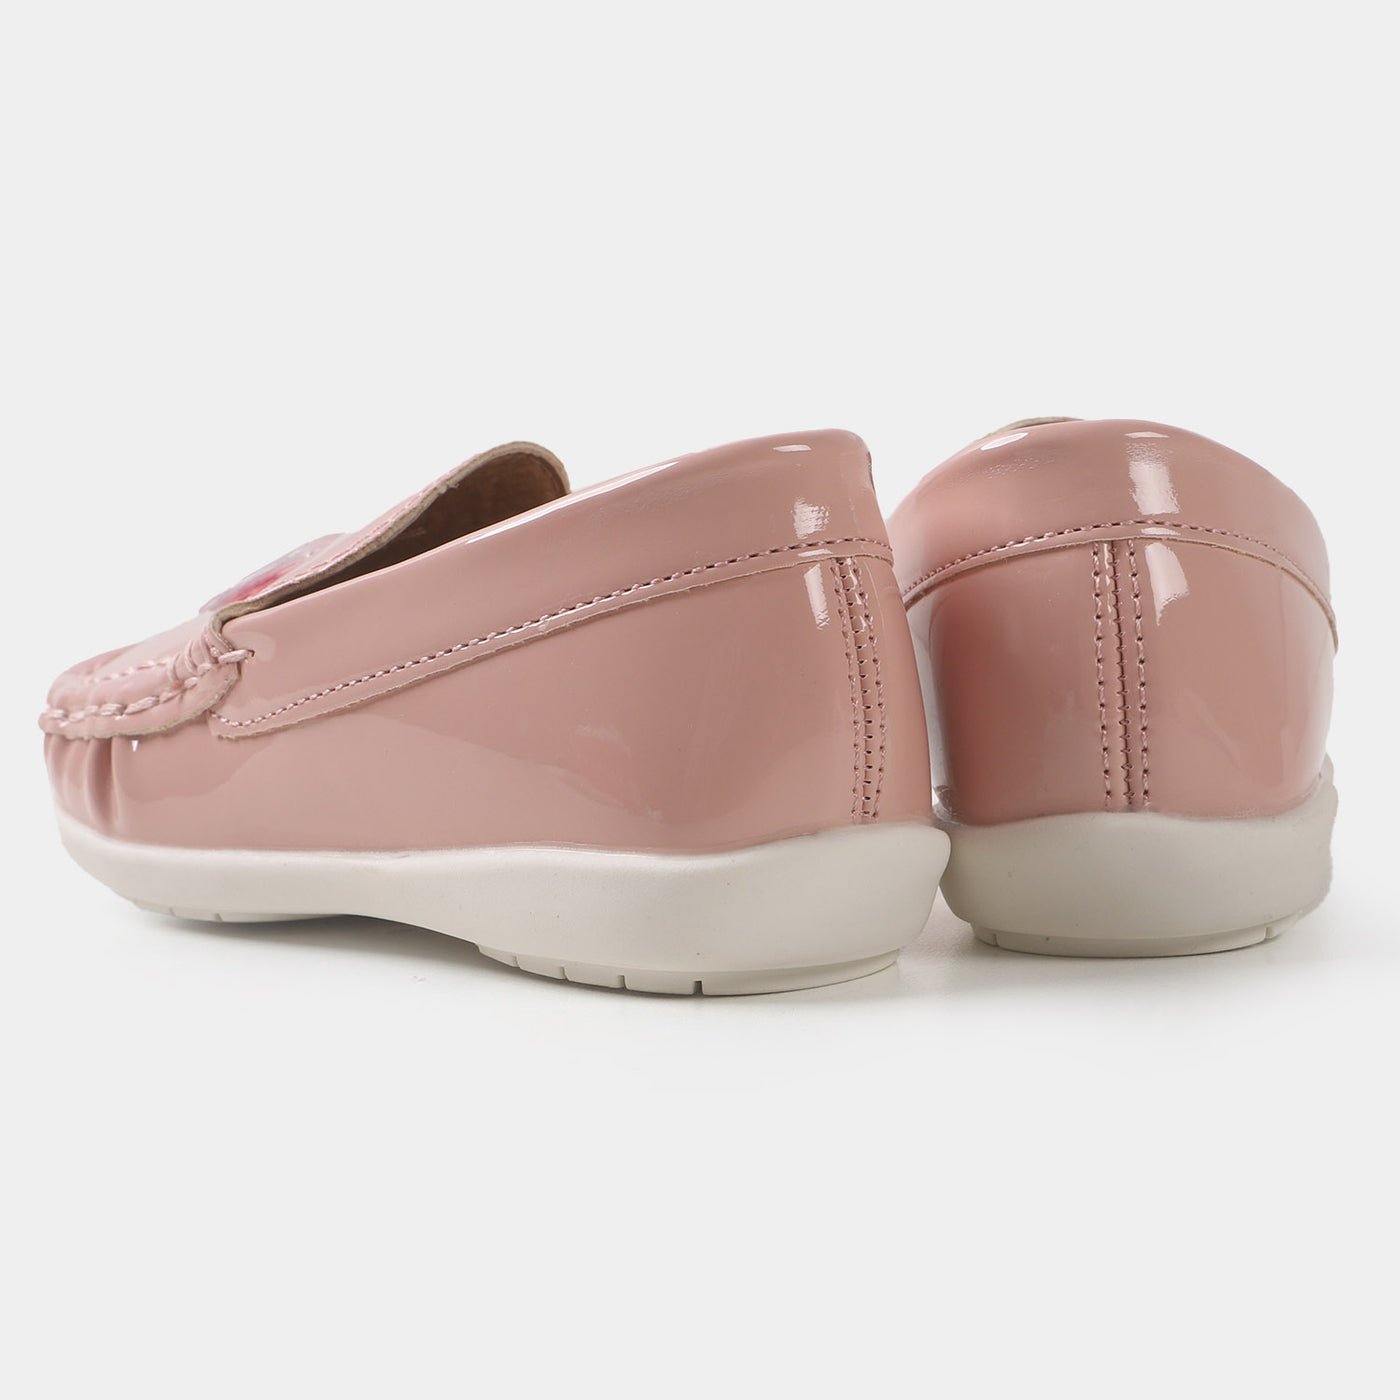 Girls Loafers 202109-2 - Pink